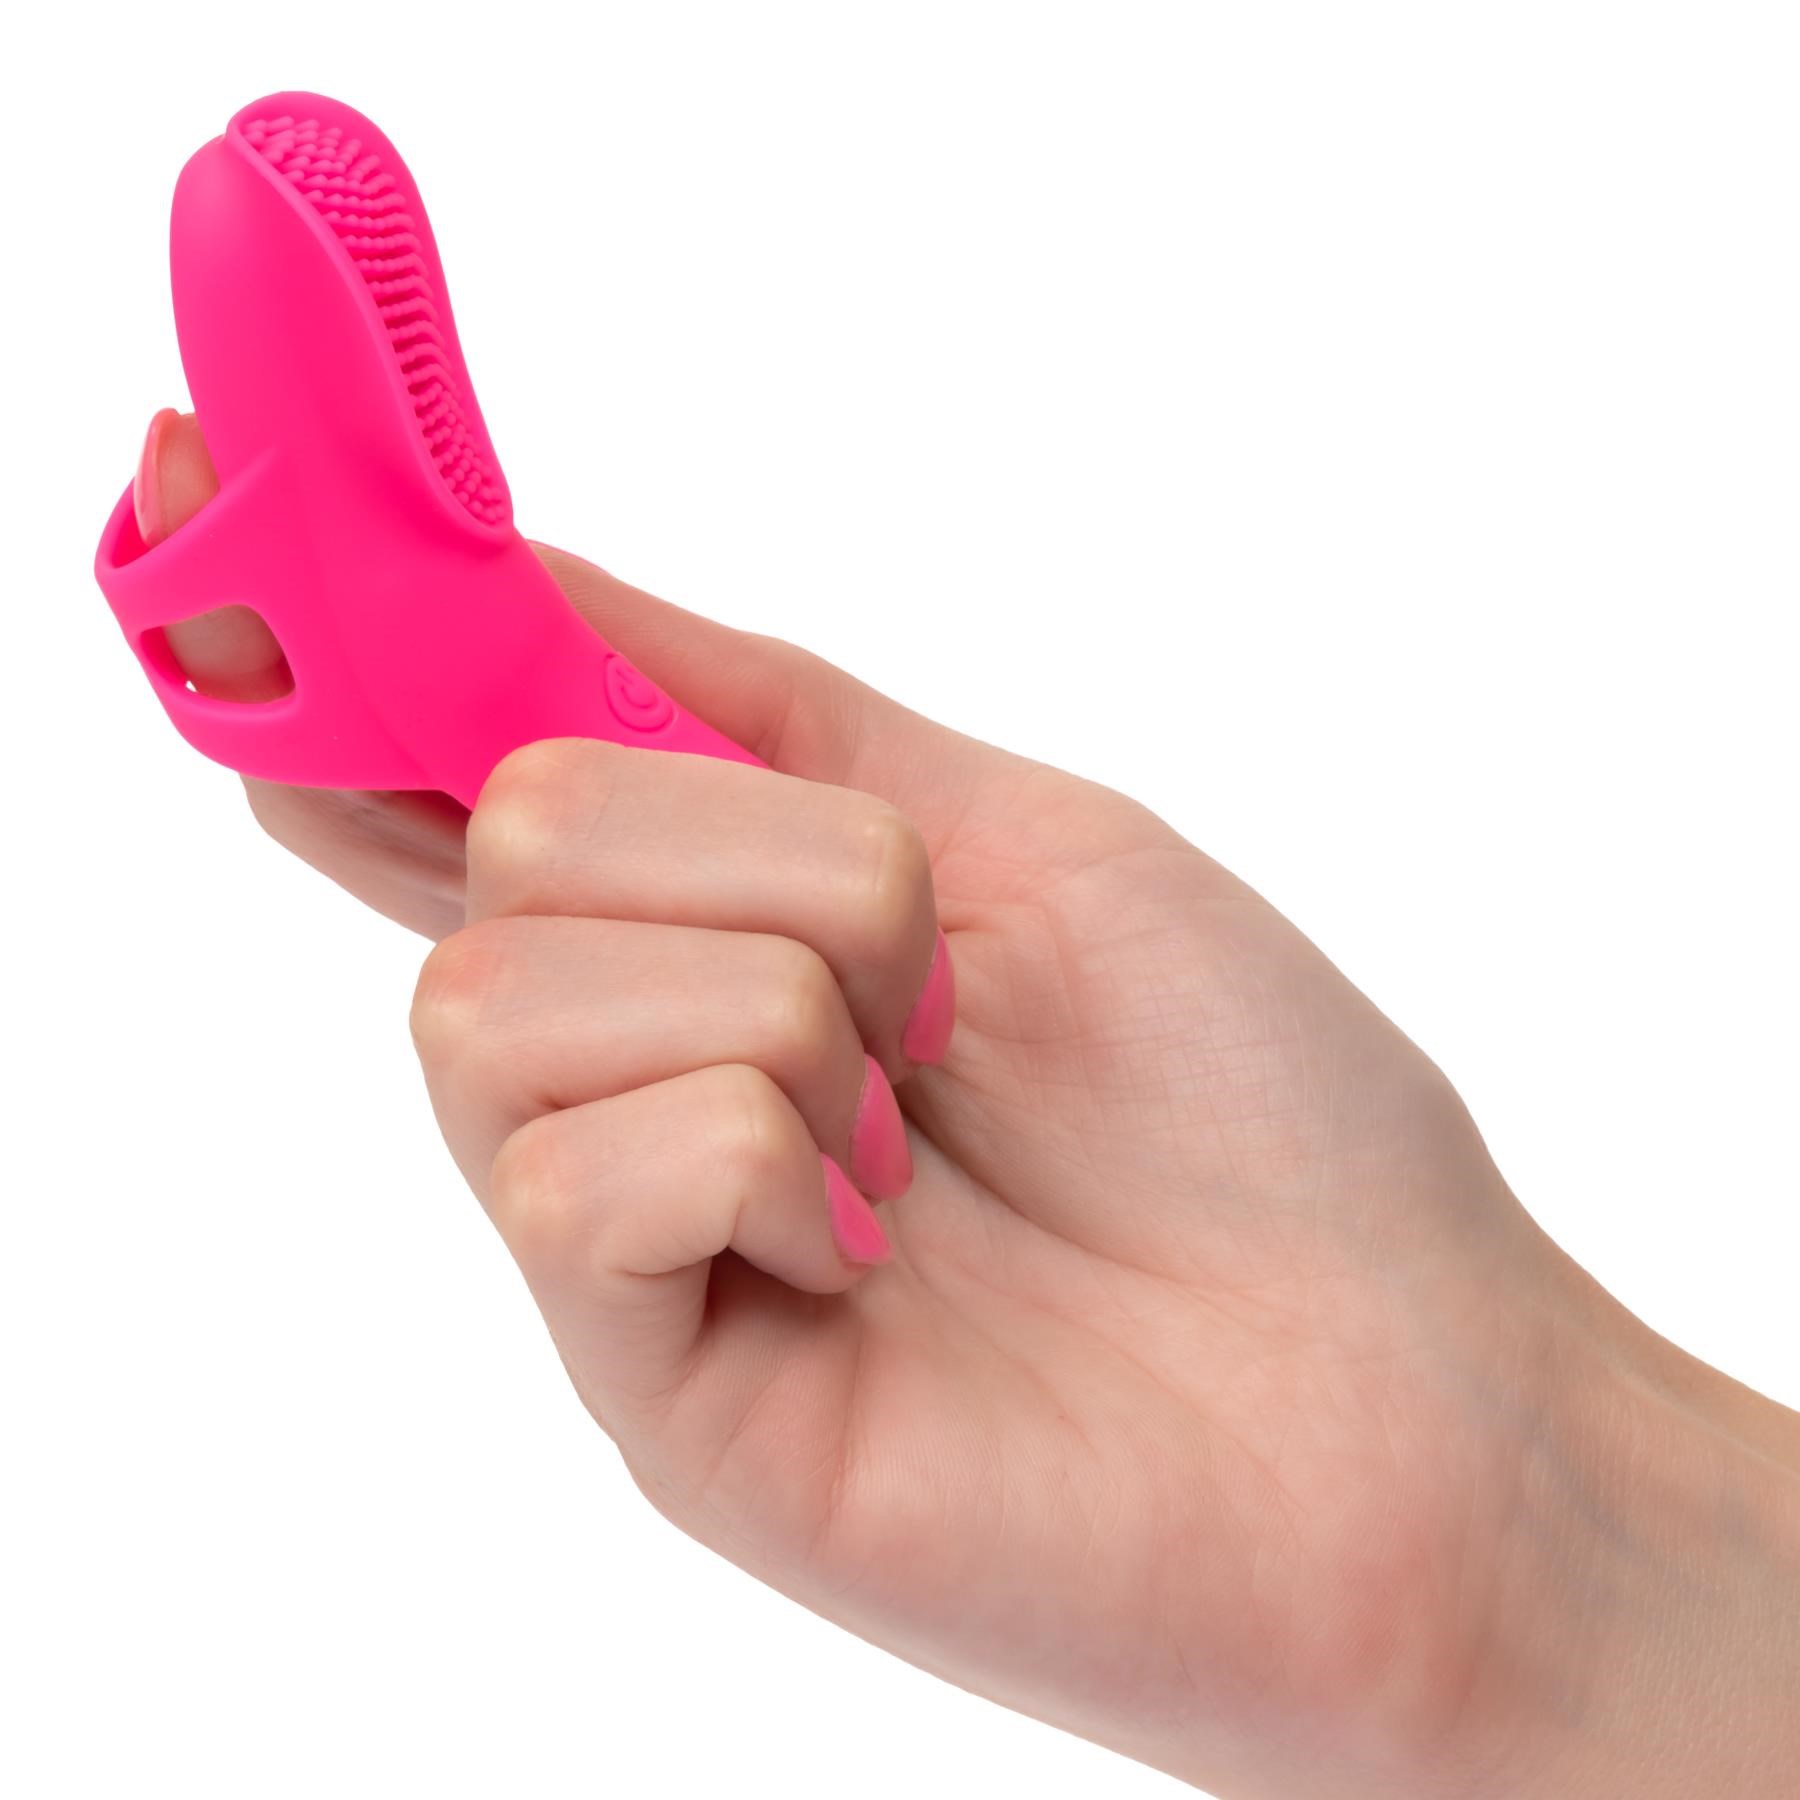 Neon Vibes The Nubby Finger Vibrator- Finger Shot to Show Size and How It Is Worn